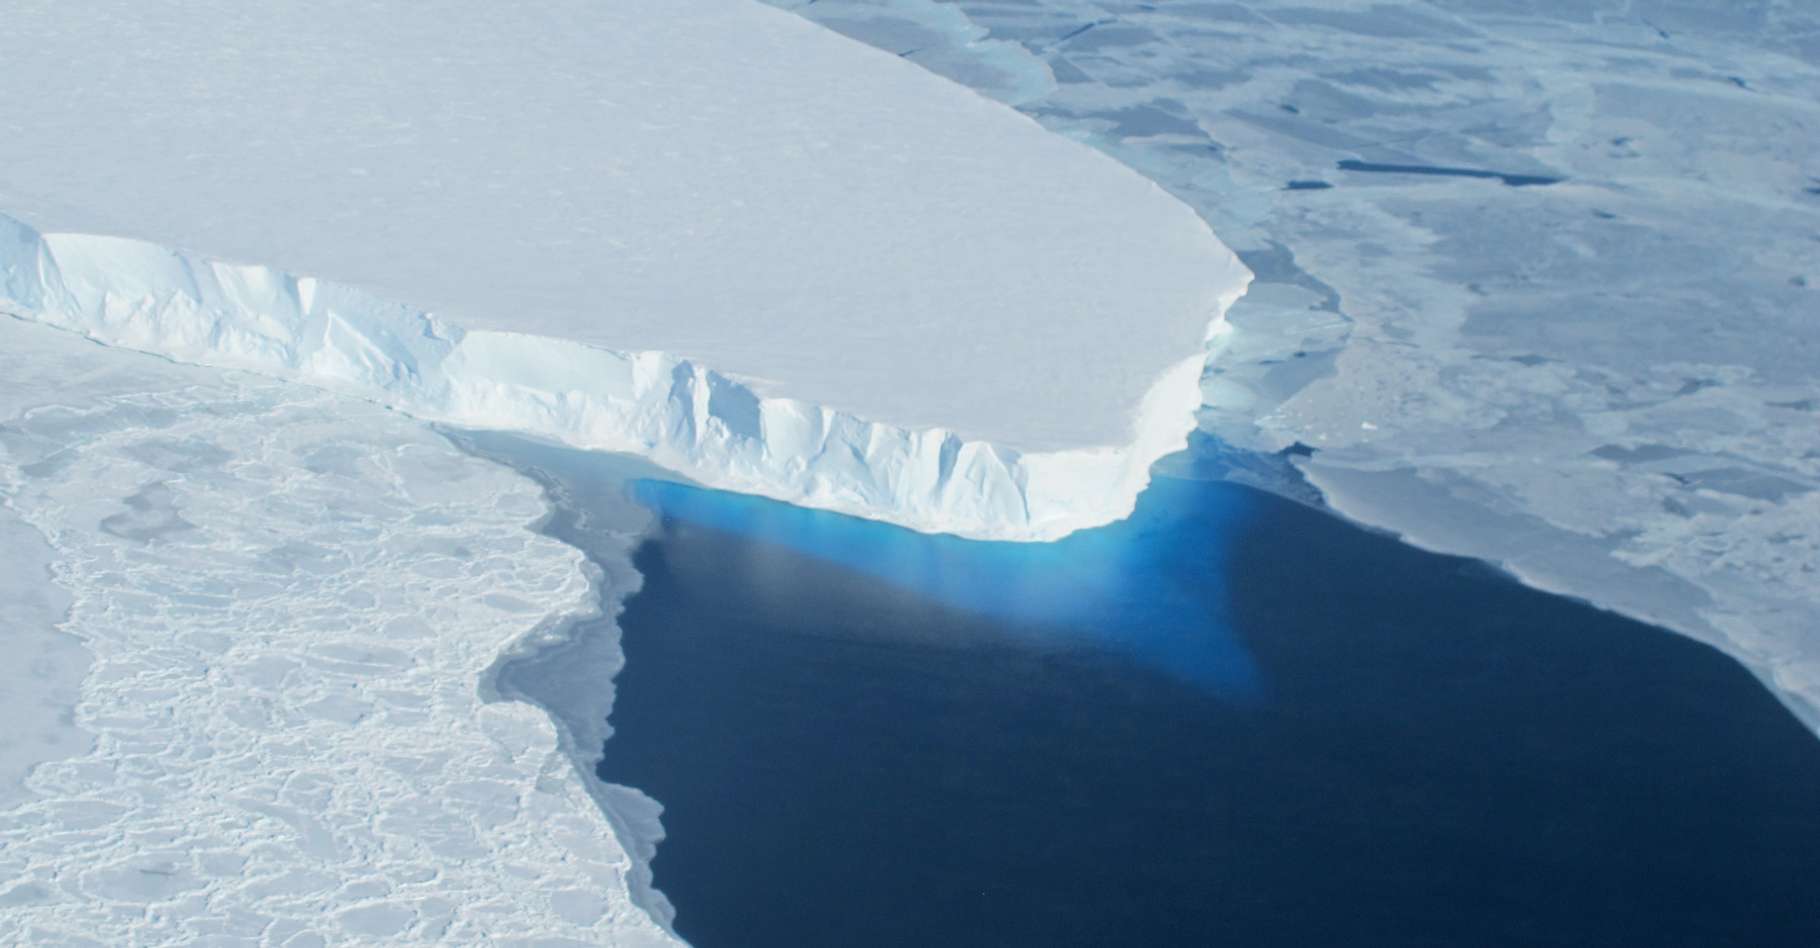 The “iceberg of the end of the world” is under close scrutiny